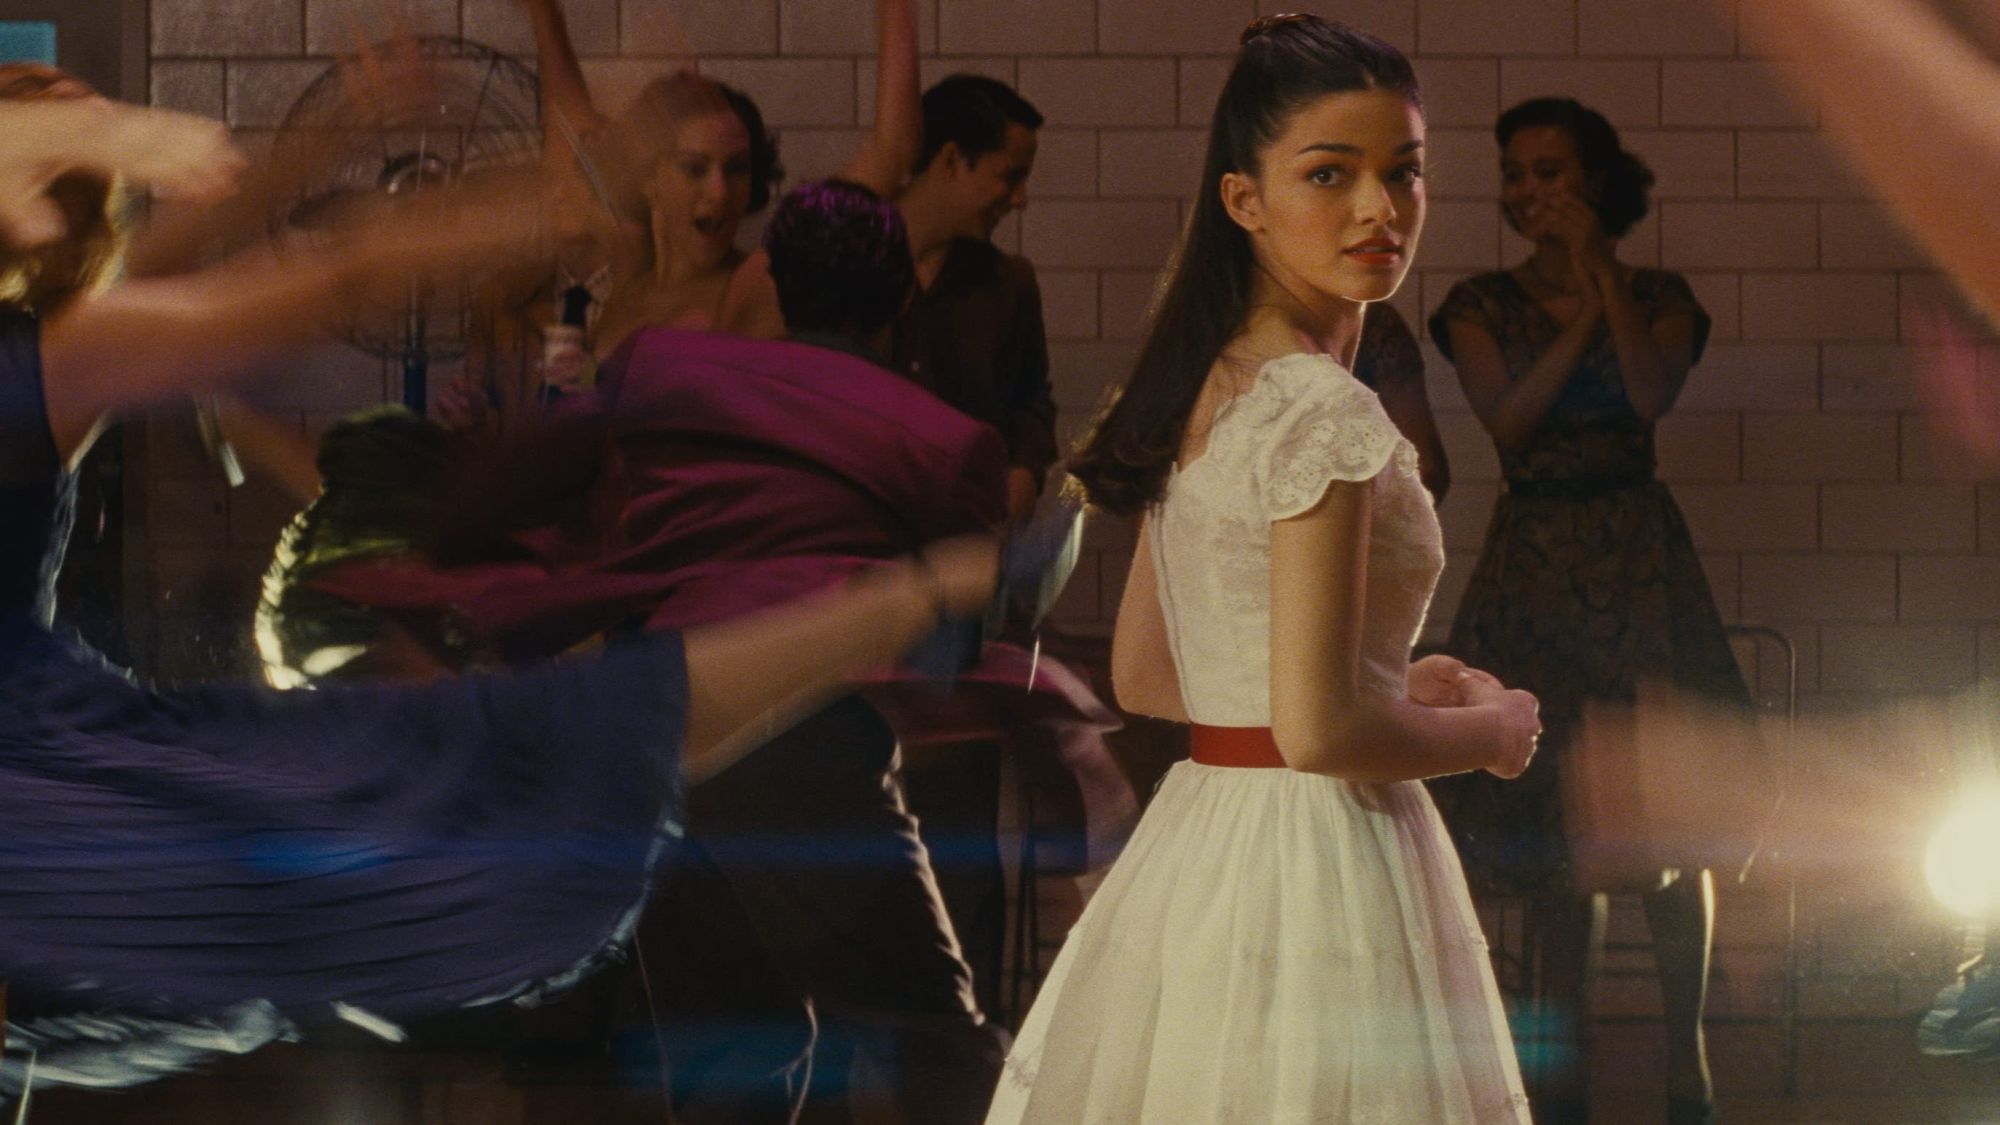 Steven Spielberg's "West Side Story": Our Honest Thoughts On The First Trailer